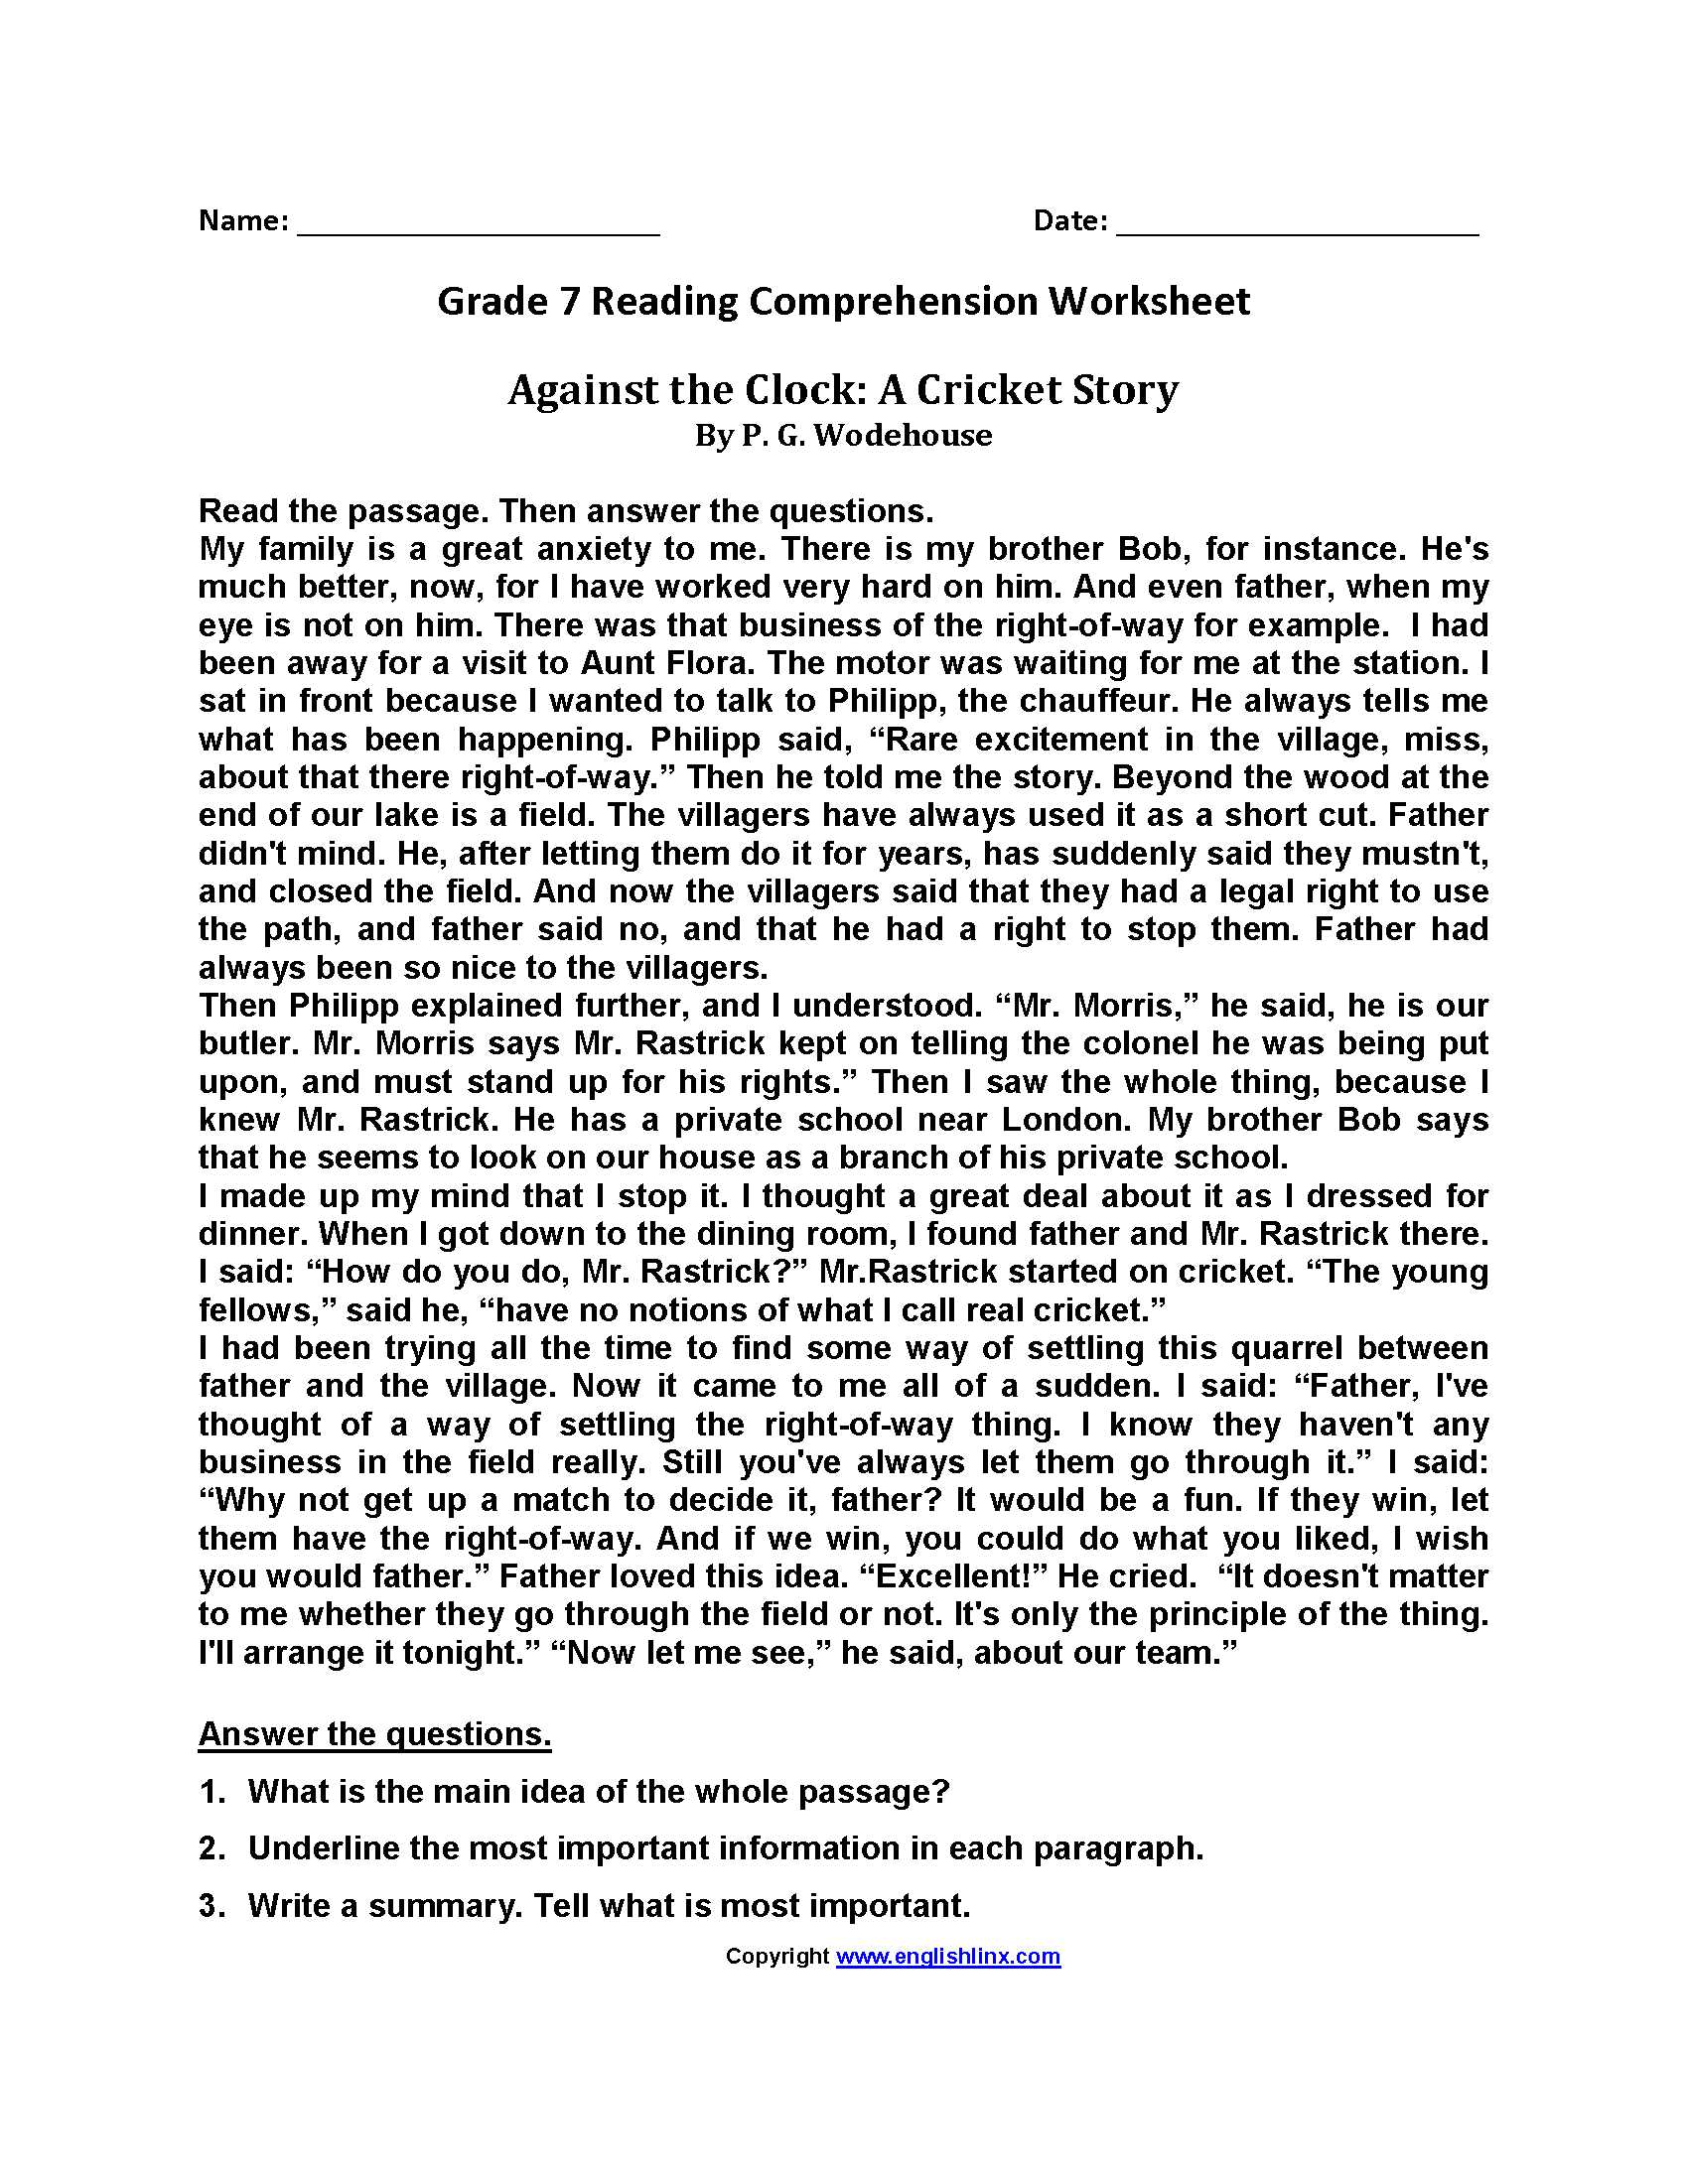 Interest Groups Worksheet Answers or Against the Clockseventh Grade Reading Worksheets